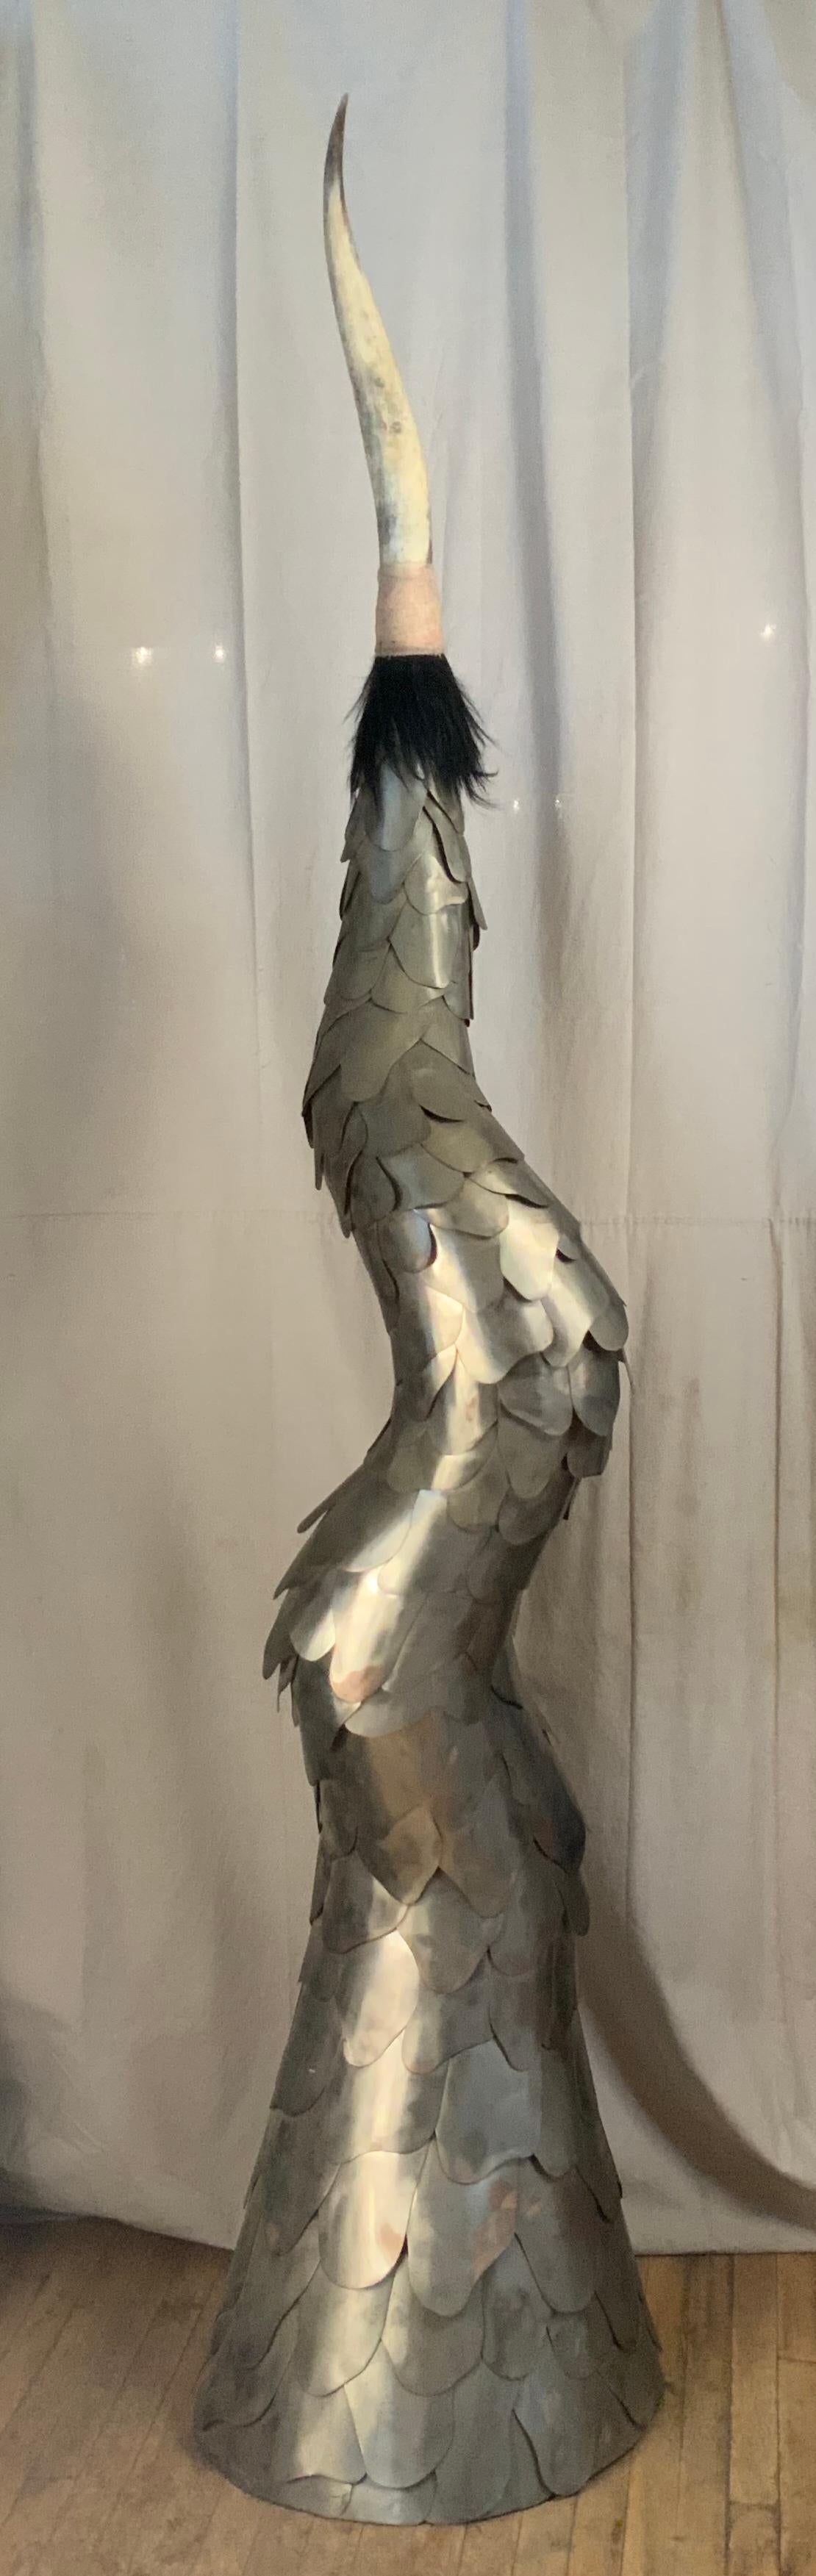 an incredible sculpture by artist Joseph Kurhajec, circa. 1972. From a series Kurhajec presented in the early 1970s, another piece from this series is in the collection of the Provincetown Art Association. 

The sculpture is a tapered and curving